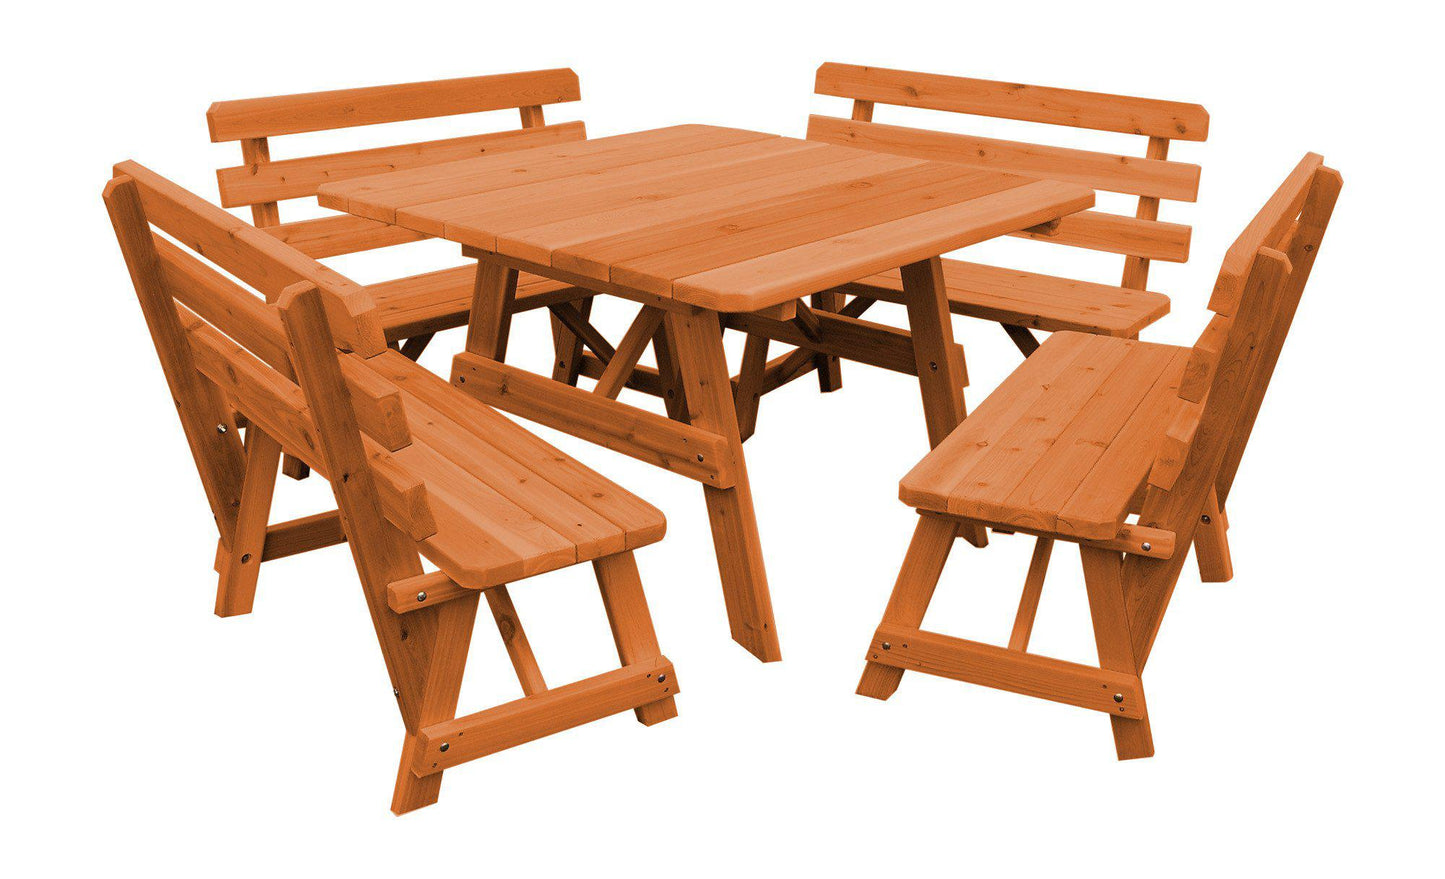 Regallion Outdoor Western Red Cedar 43" Square Table w/ 4 Backed Benches- Specify for FREE 2" Umbrella Hole - LEAD TIME TO SHIP 2 WEEKS